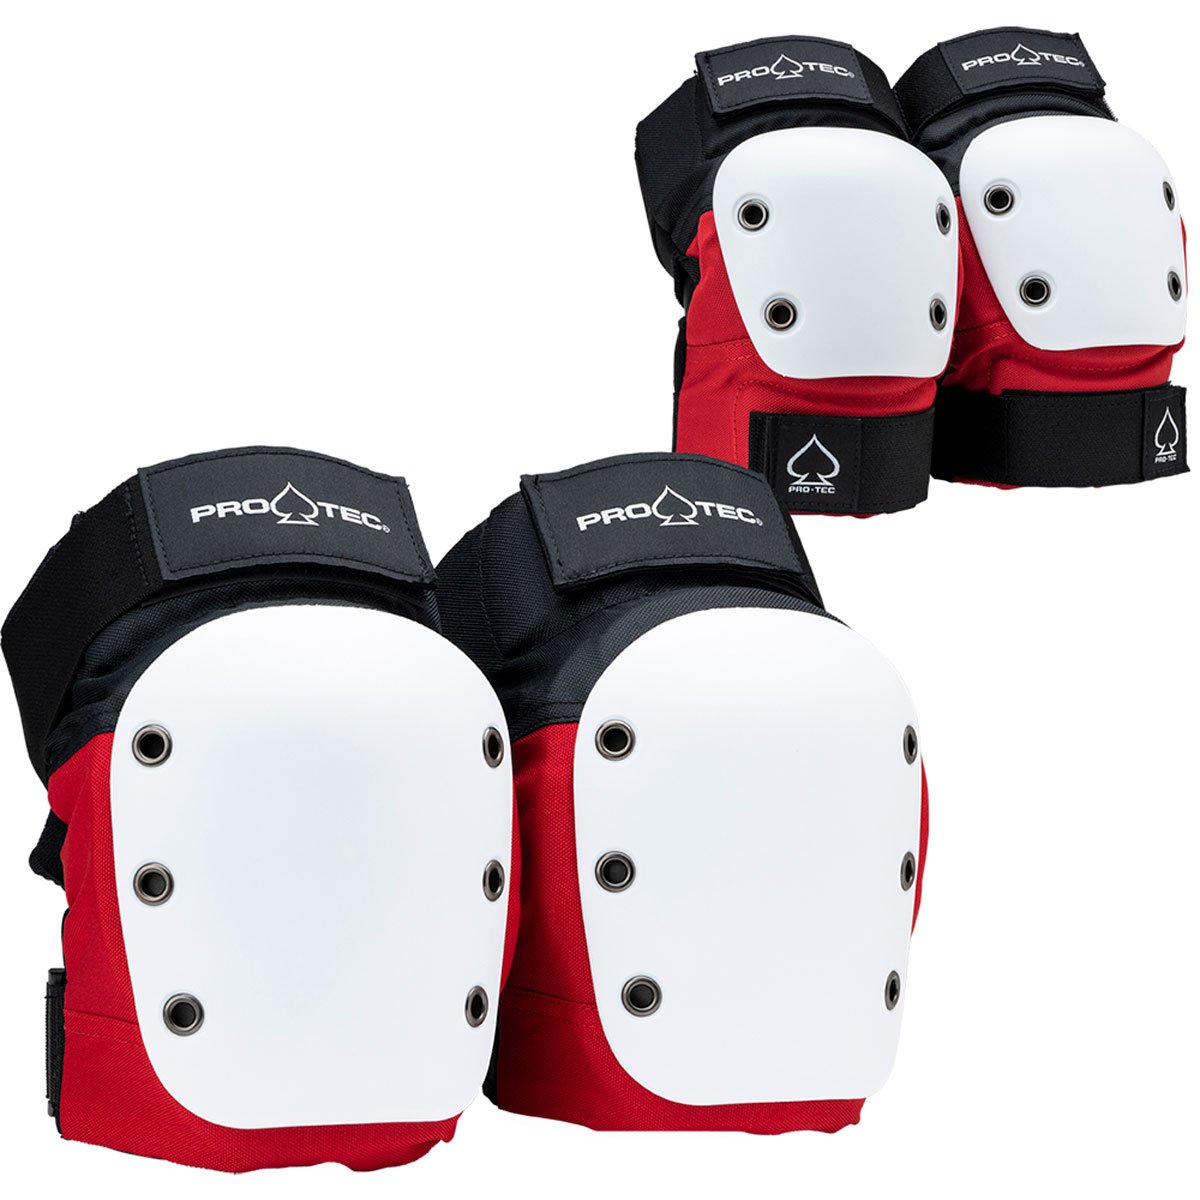 Pro-Tec Knee/Elbow Set of Pads - Red/White image 1